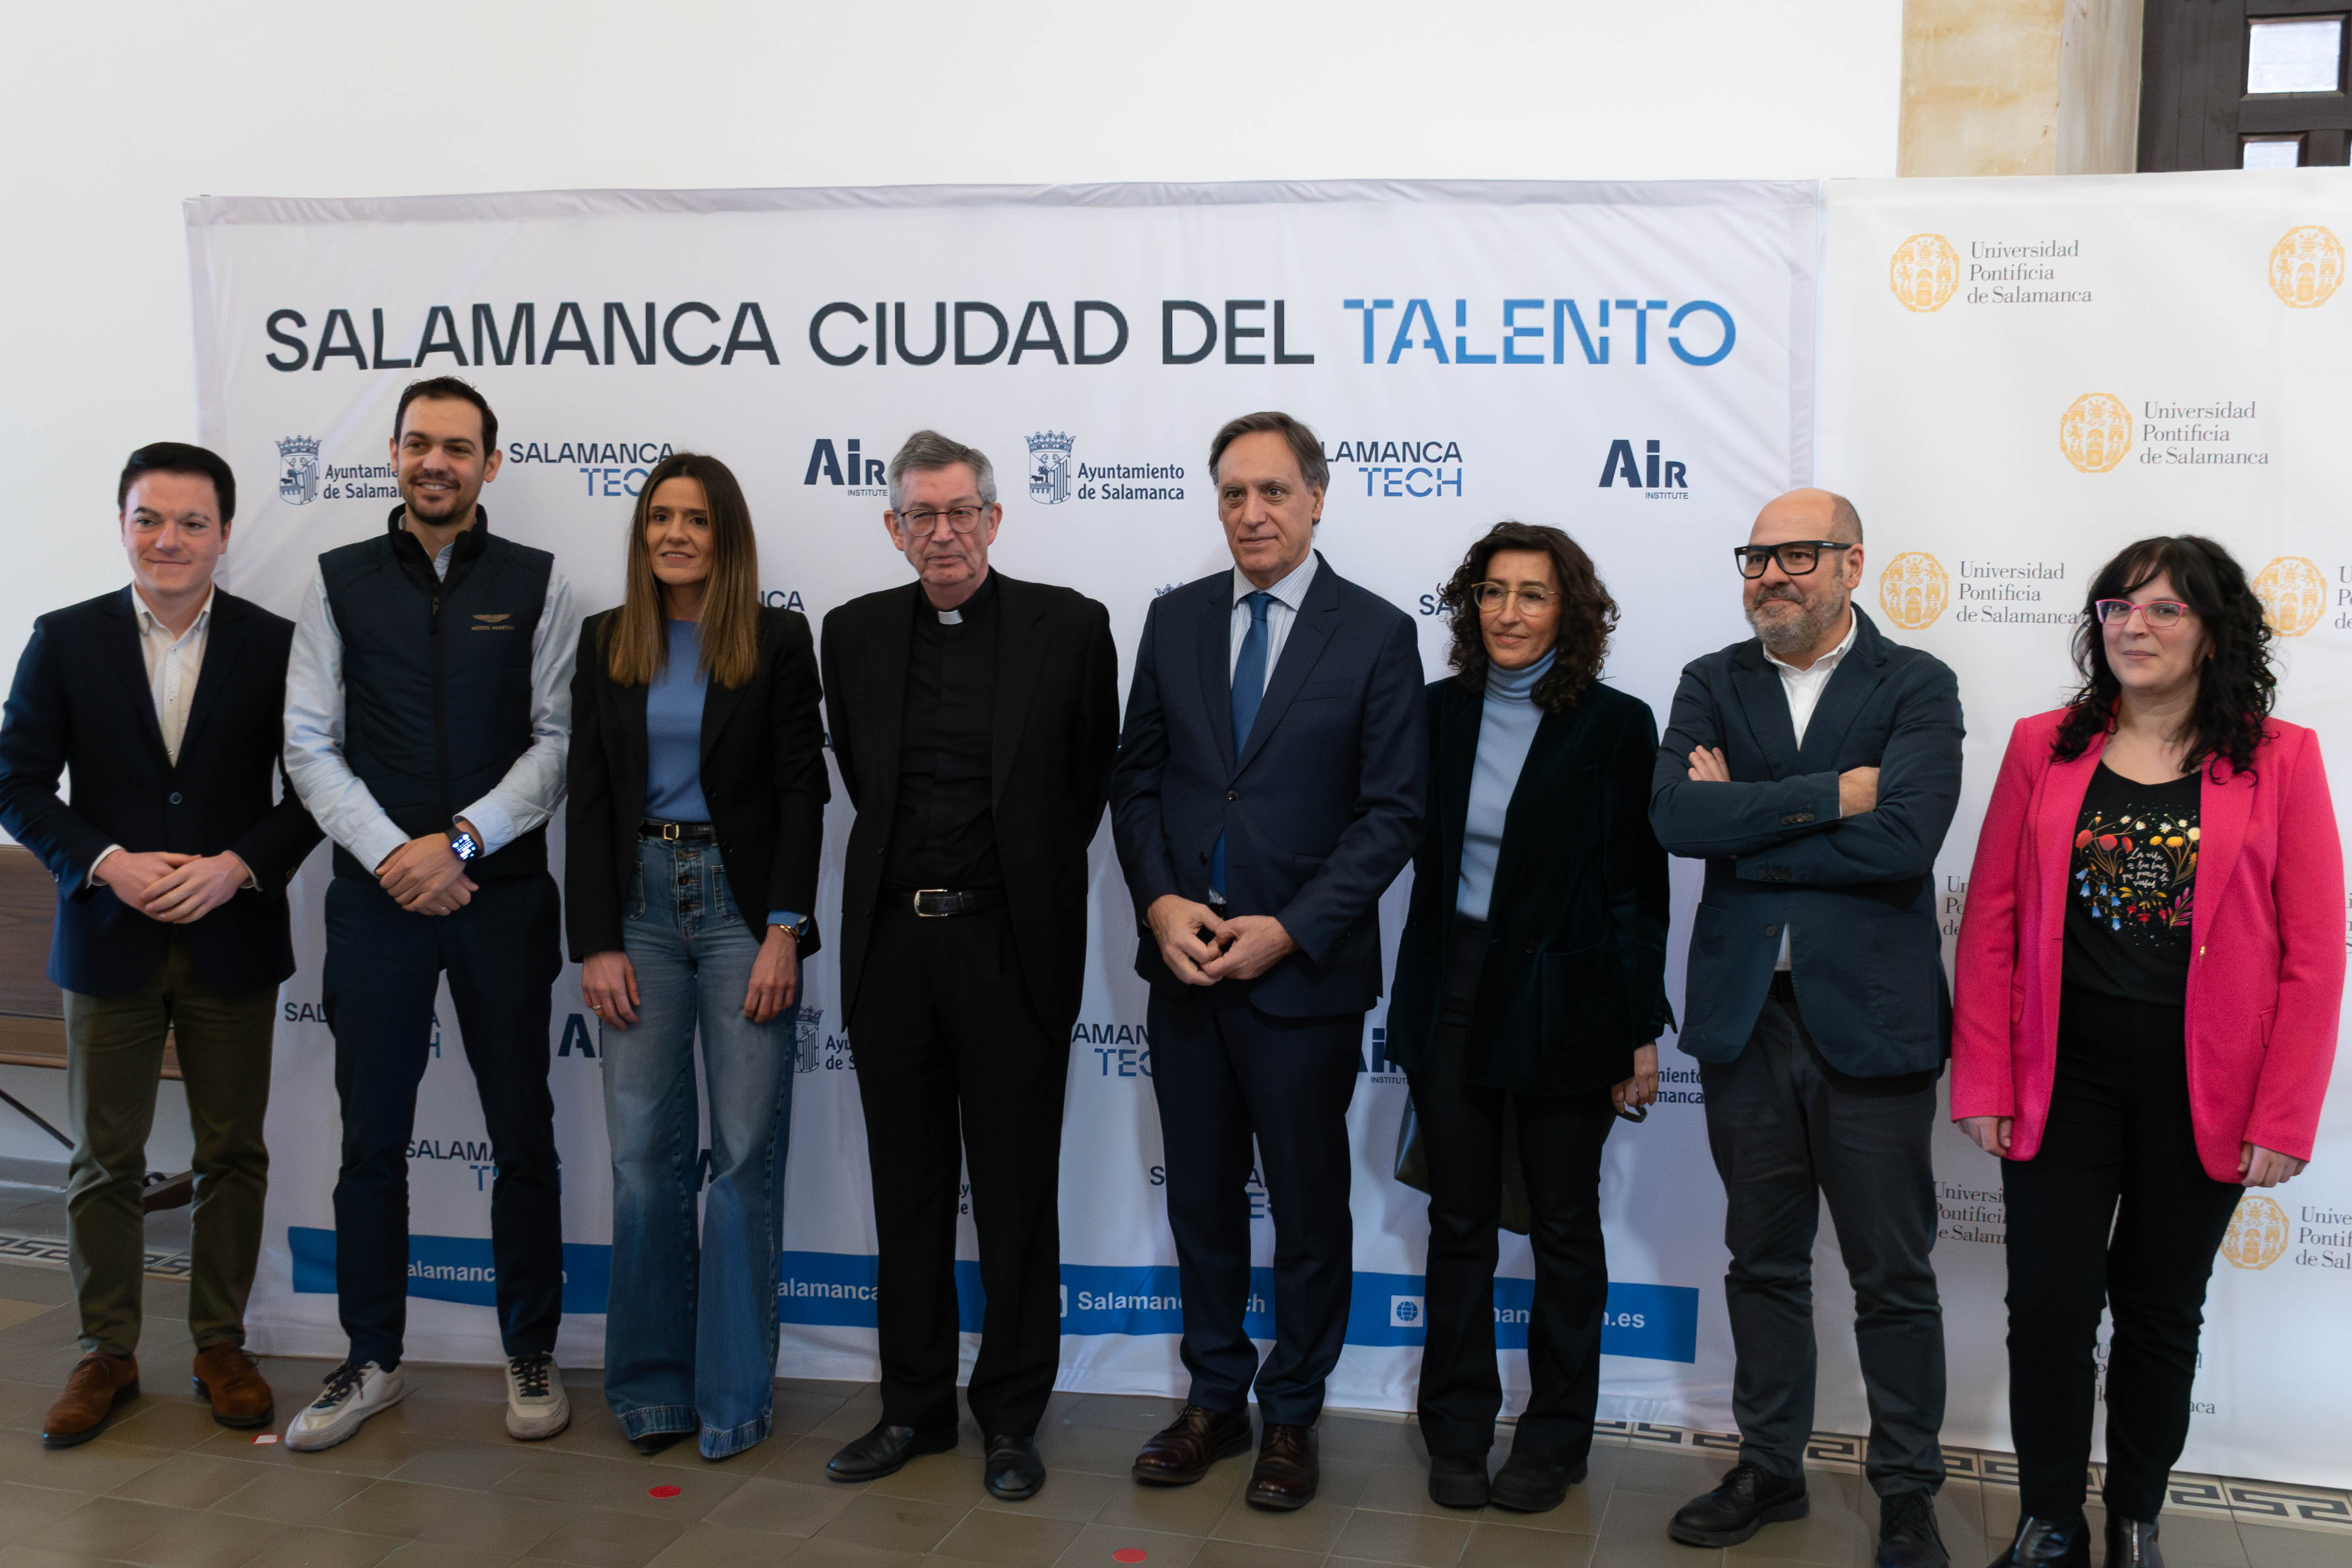 Salamanca Tech, a benchmark in training and entrepreneurship for the provision of new job opportunities to young people